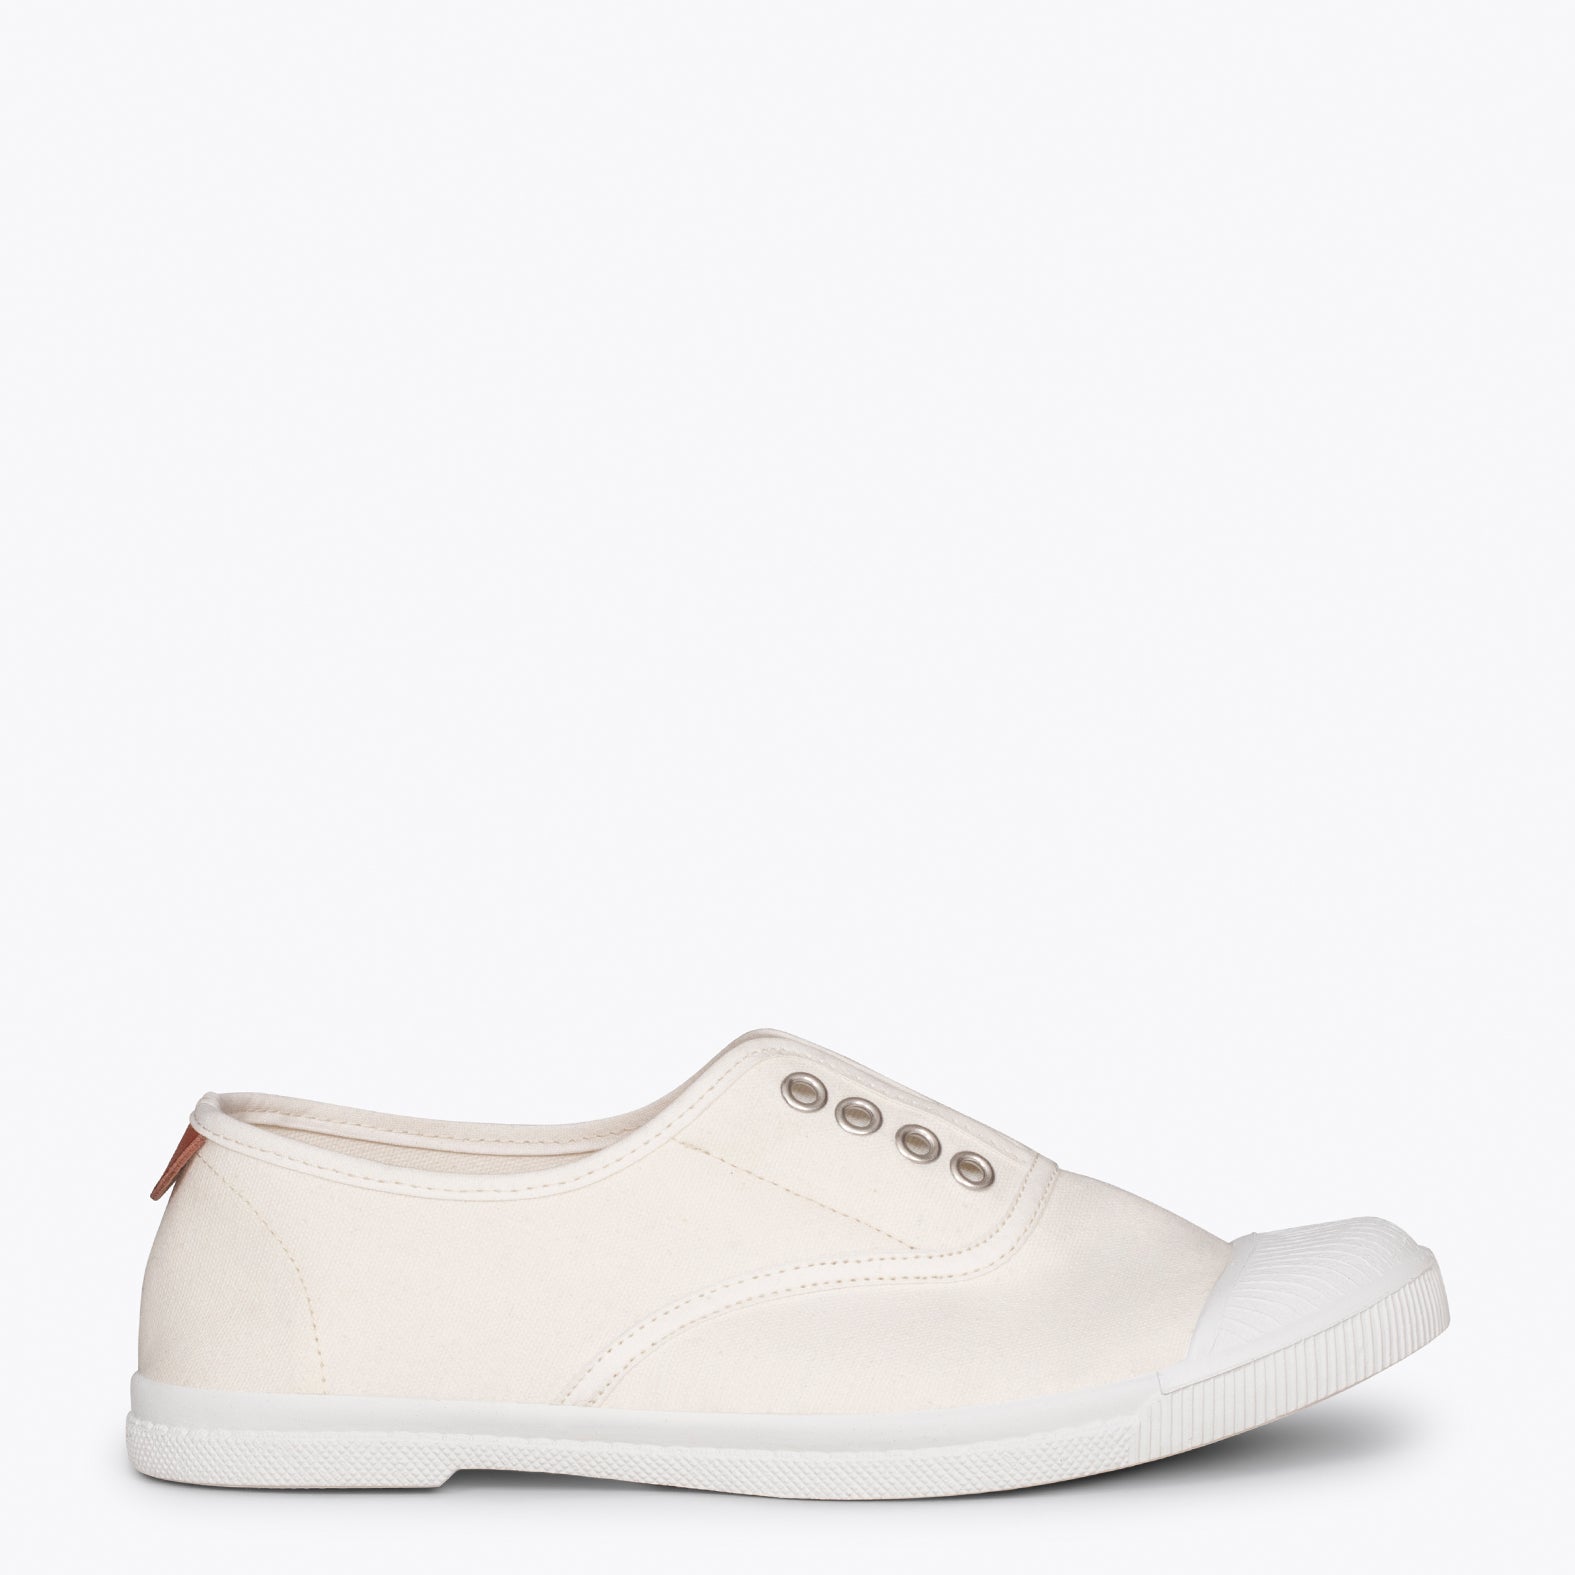 WAY – WHITE sneakers with elastic